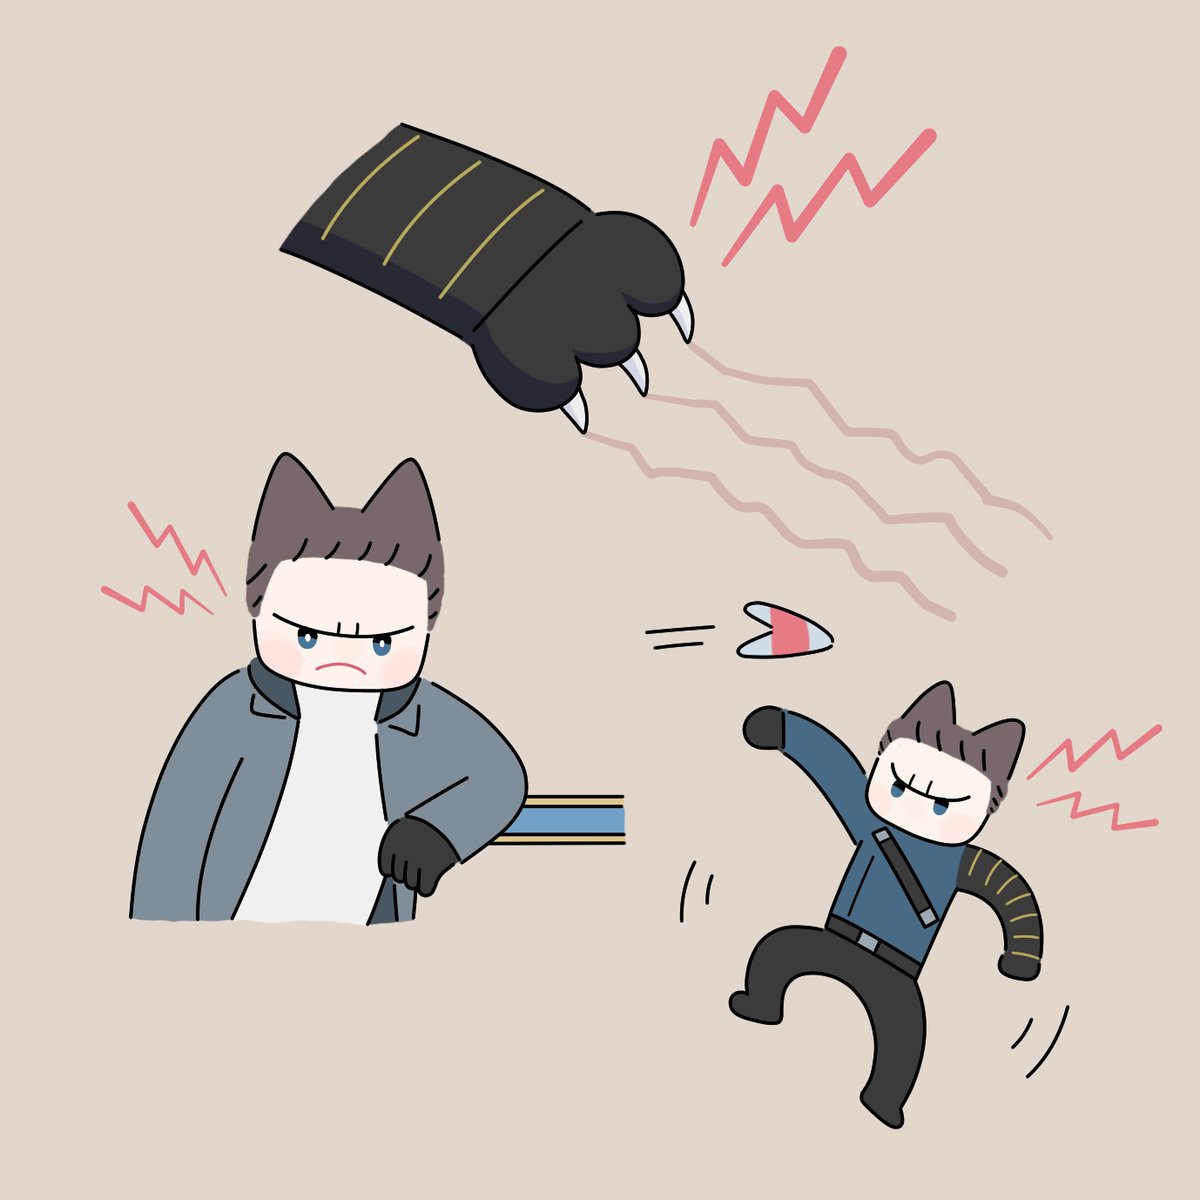 Catbucky
from The Falcon and the Winter Soldier
#buckybarnes
#TheFalconandtheWinterSoldier